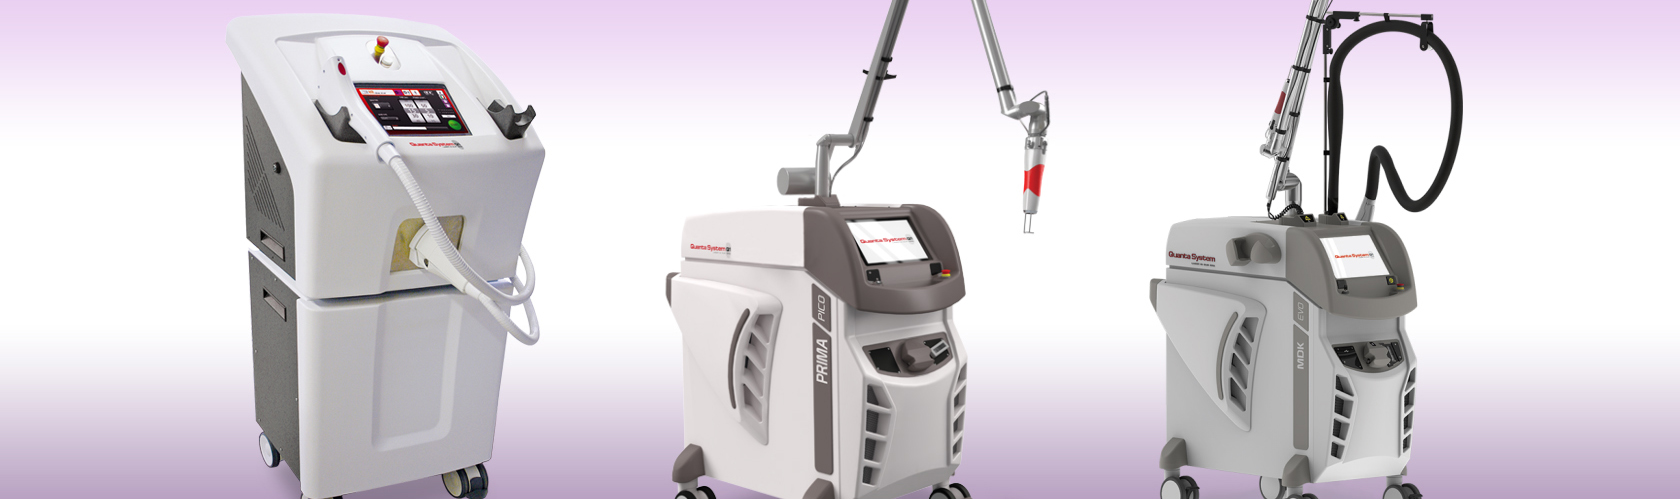 Used Laser Machines, Refurbished and New Hair Removal Lasers, Surgical,  Medical, and Cosmetic Laser Equipment in San Diego, Los Angeles, and Orange  County CA - ProMed Solutions